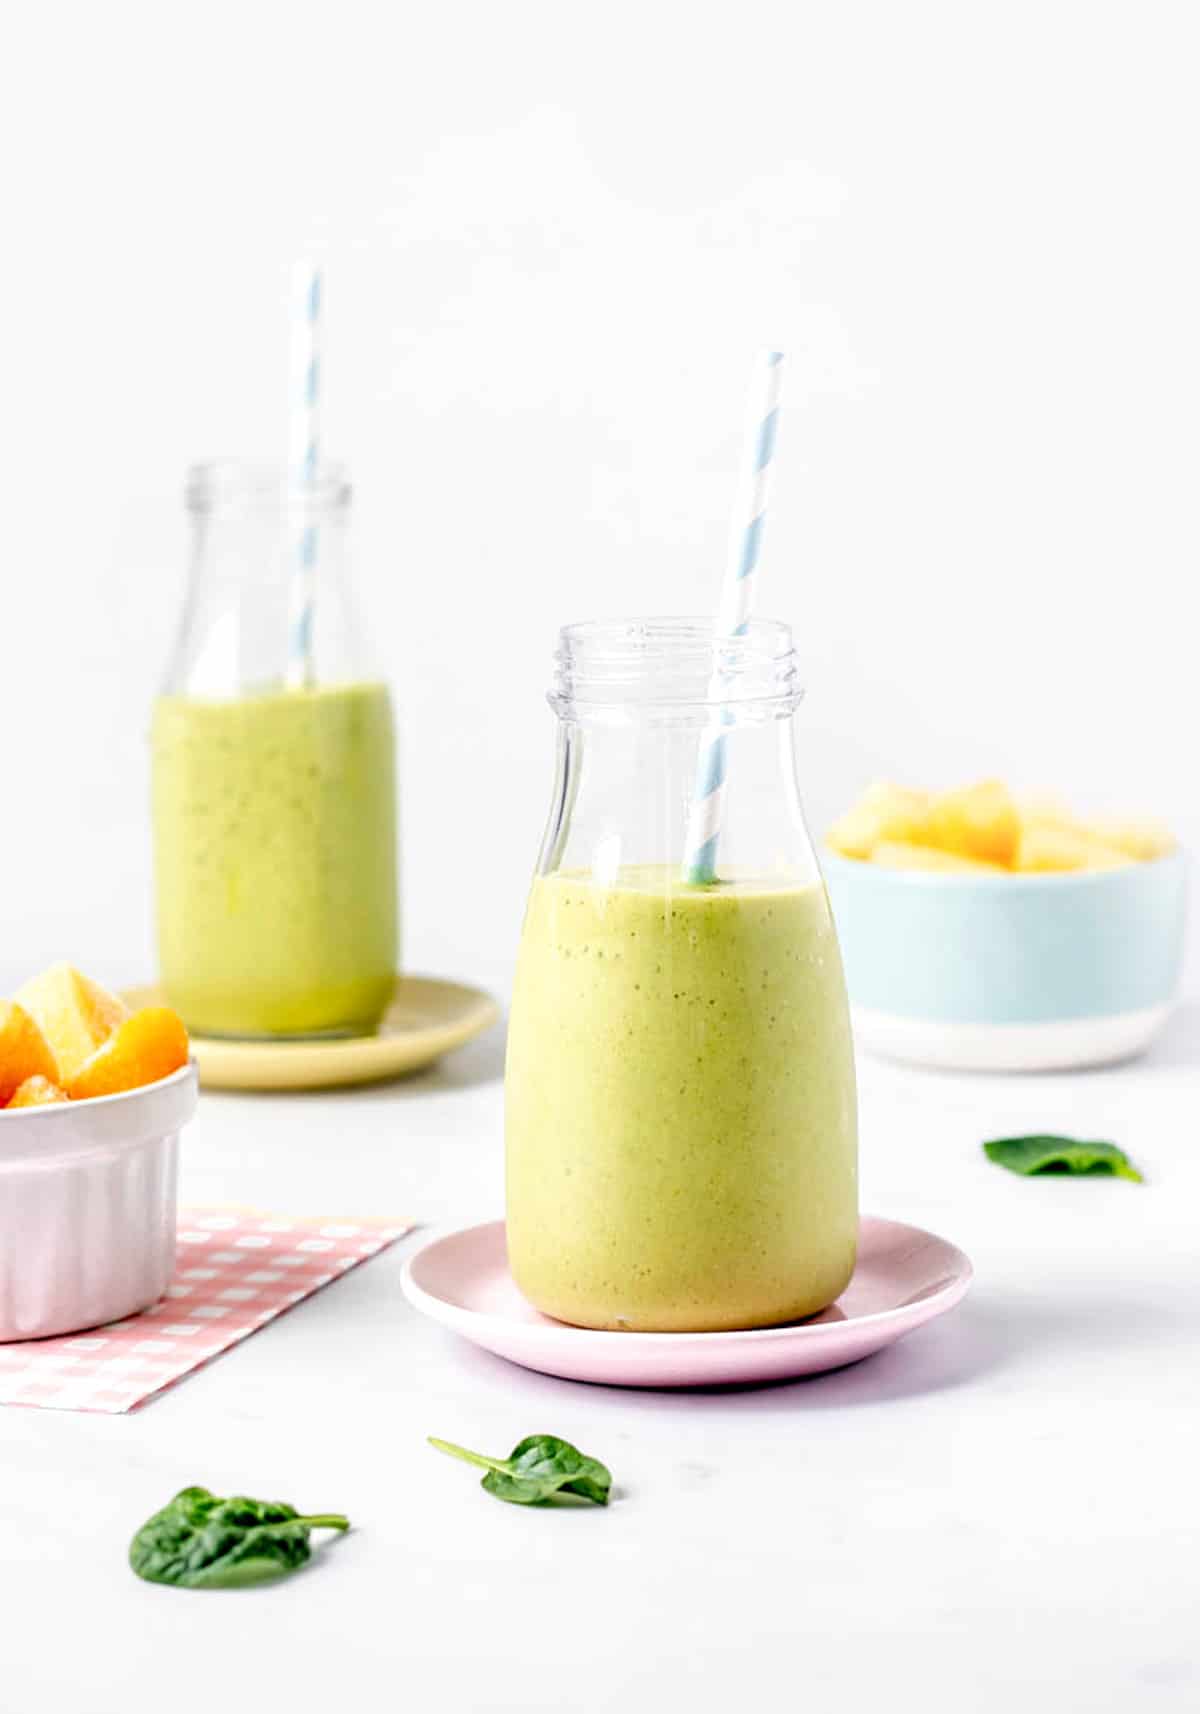 Two milk bottles with tropical green smoothie and straws.